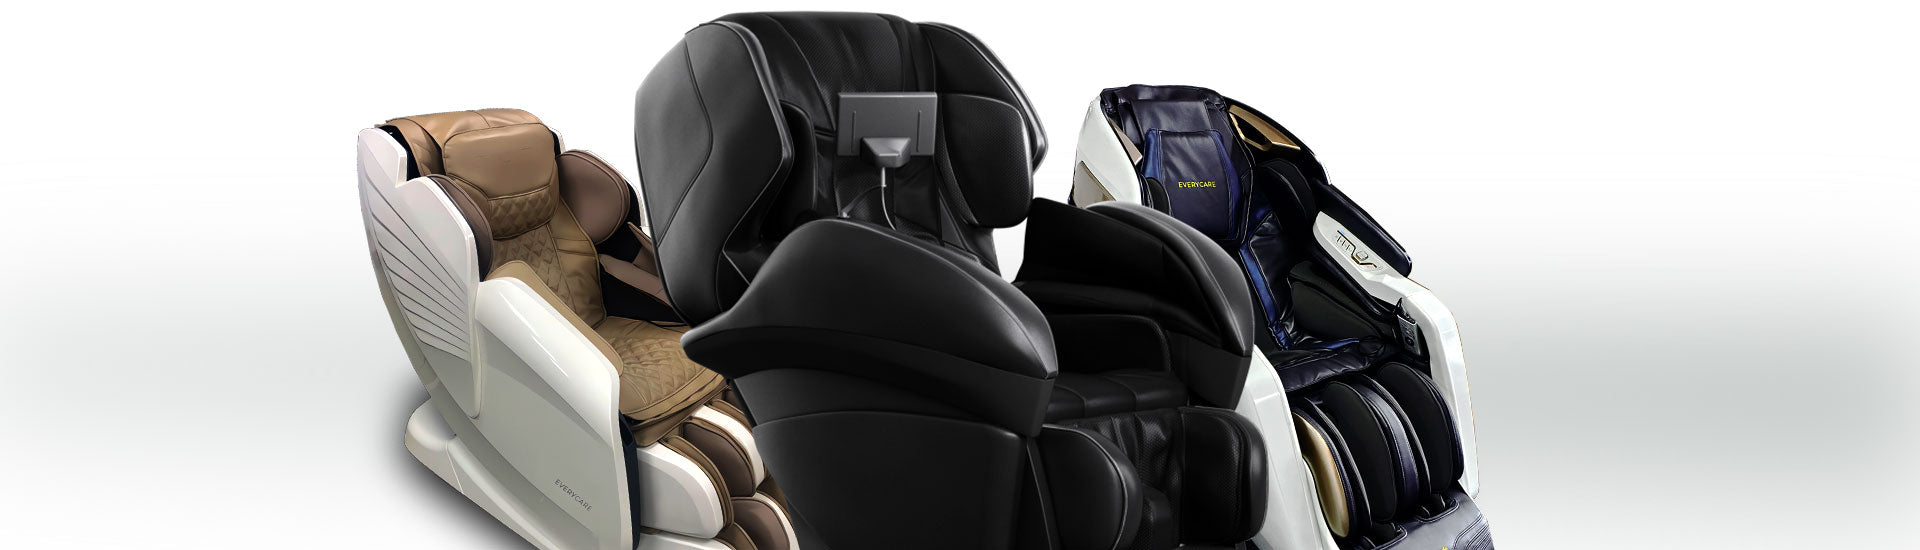 An image that shows the compact in size massage chairs